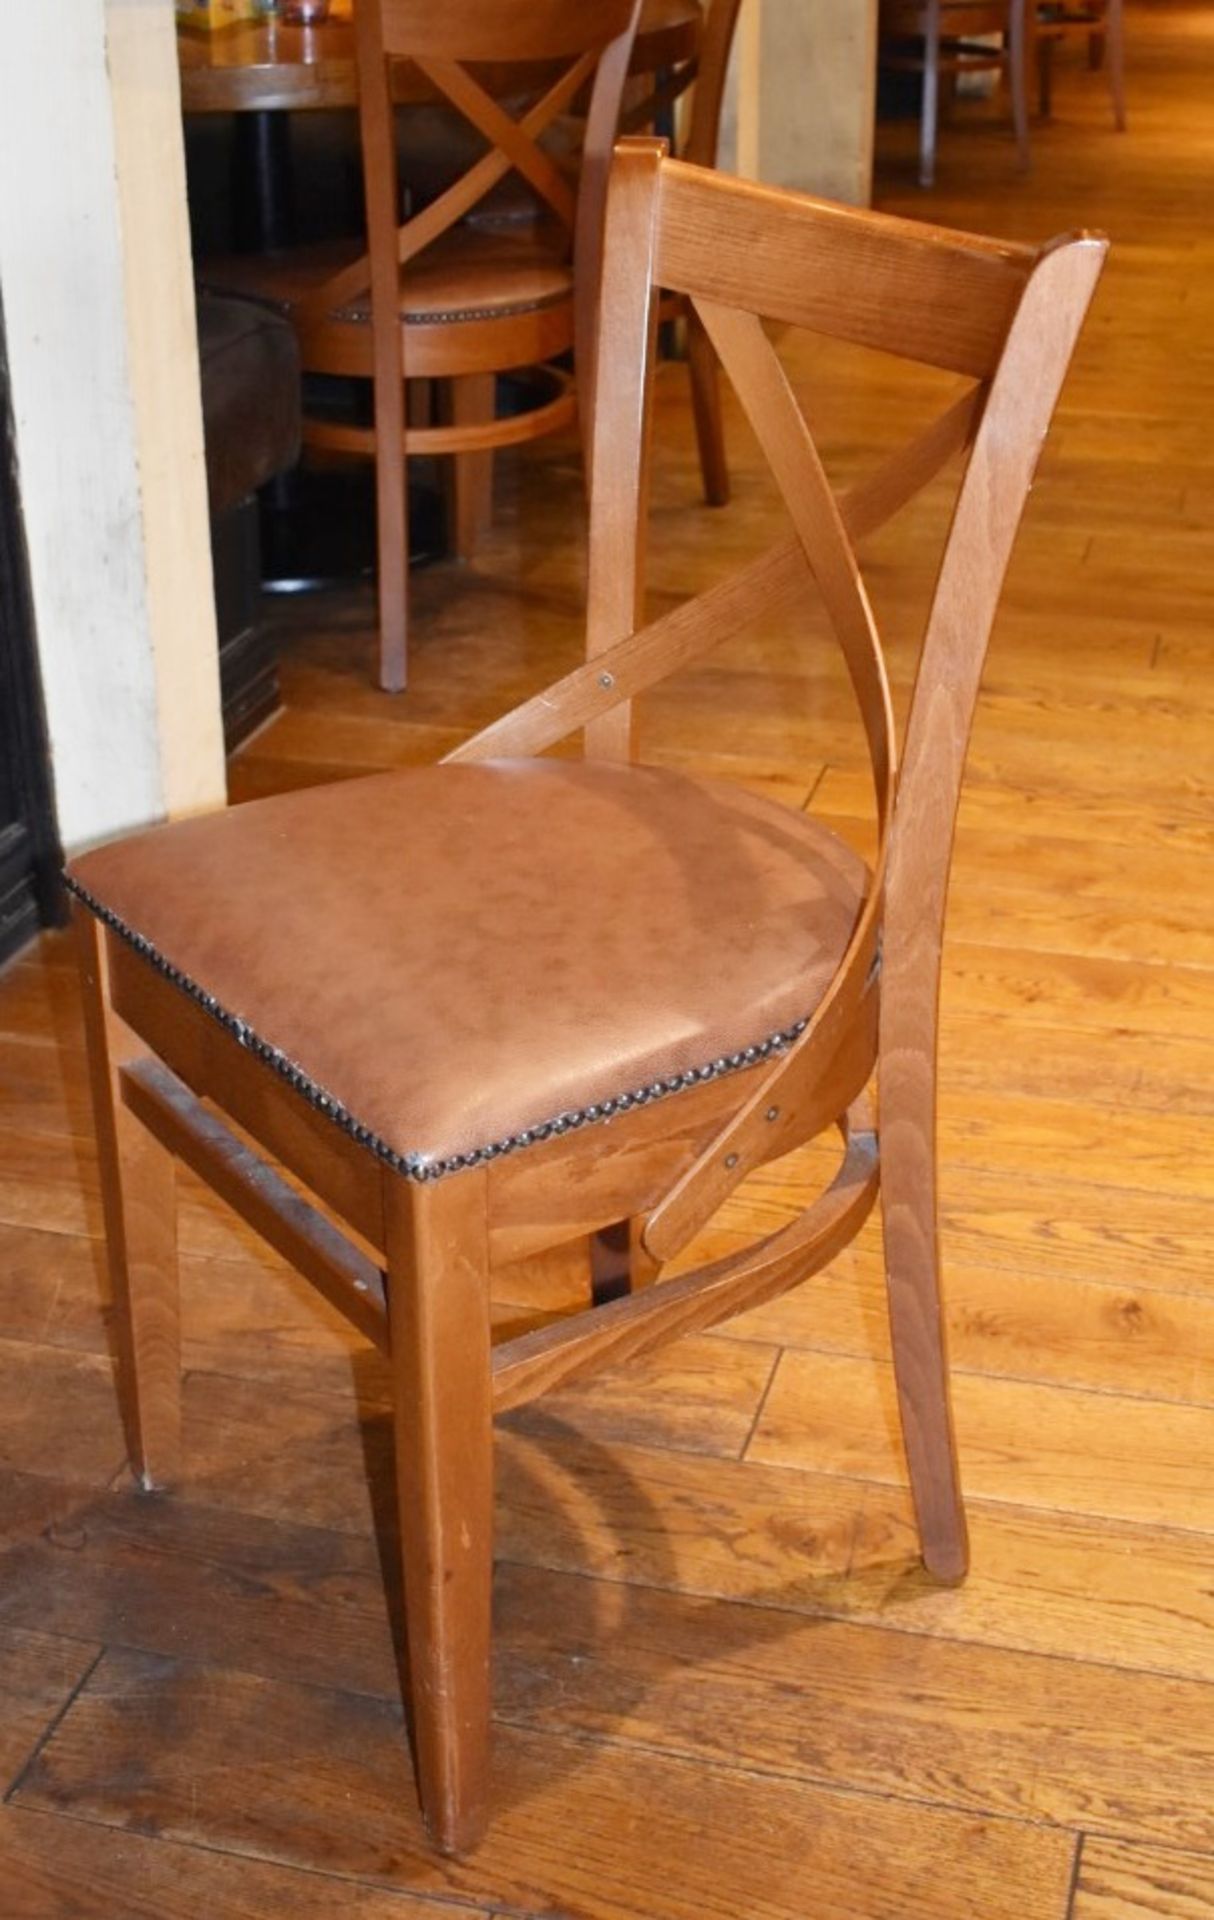 6 x Restaurant Dining Chairs With Wooden Crossbacks and Faux Leather Brown Seat Pads - H84 x W45 cms